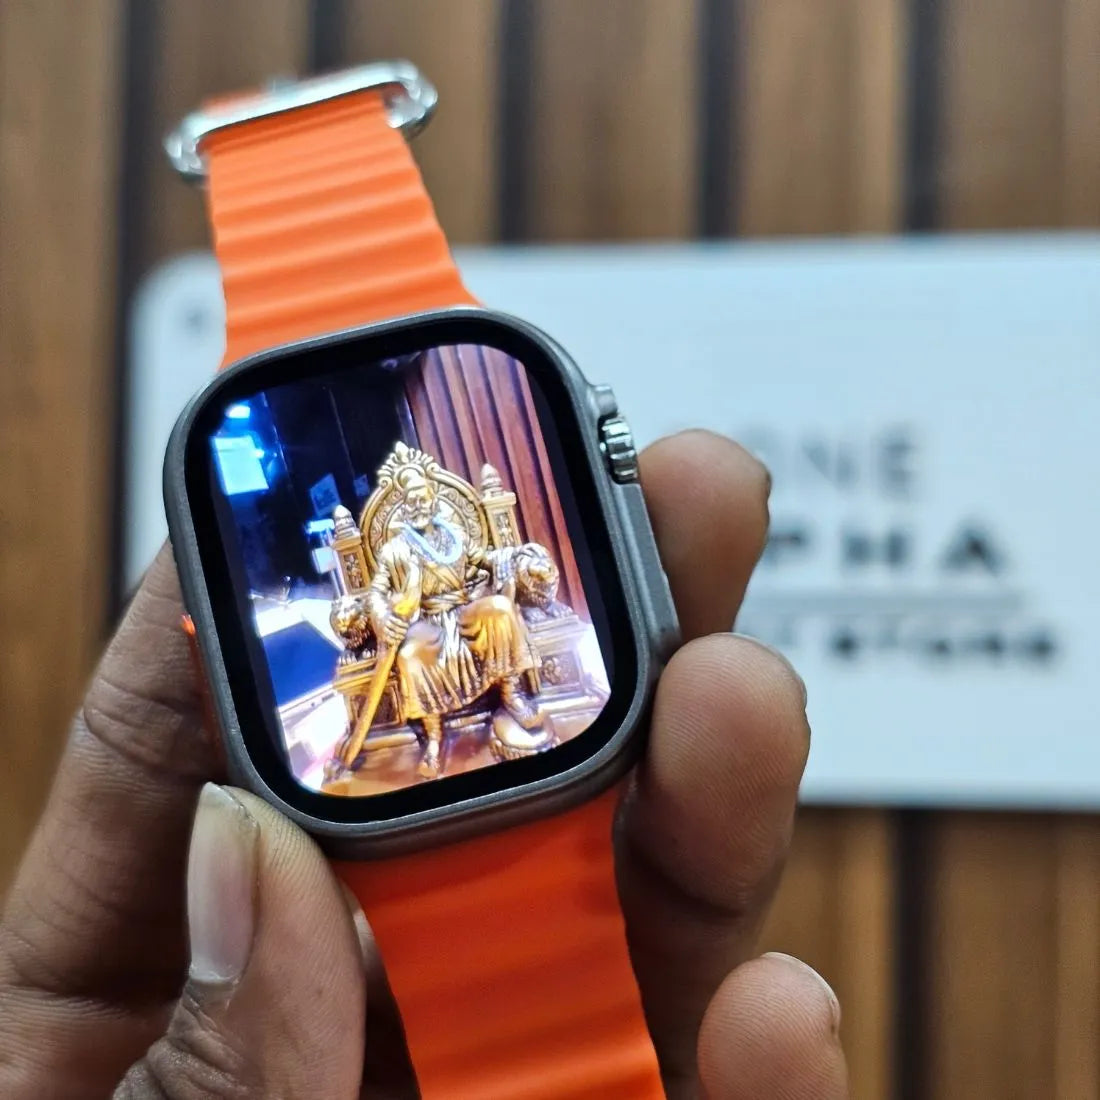 HK 11 Ultra One Android Smartwatch